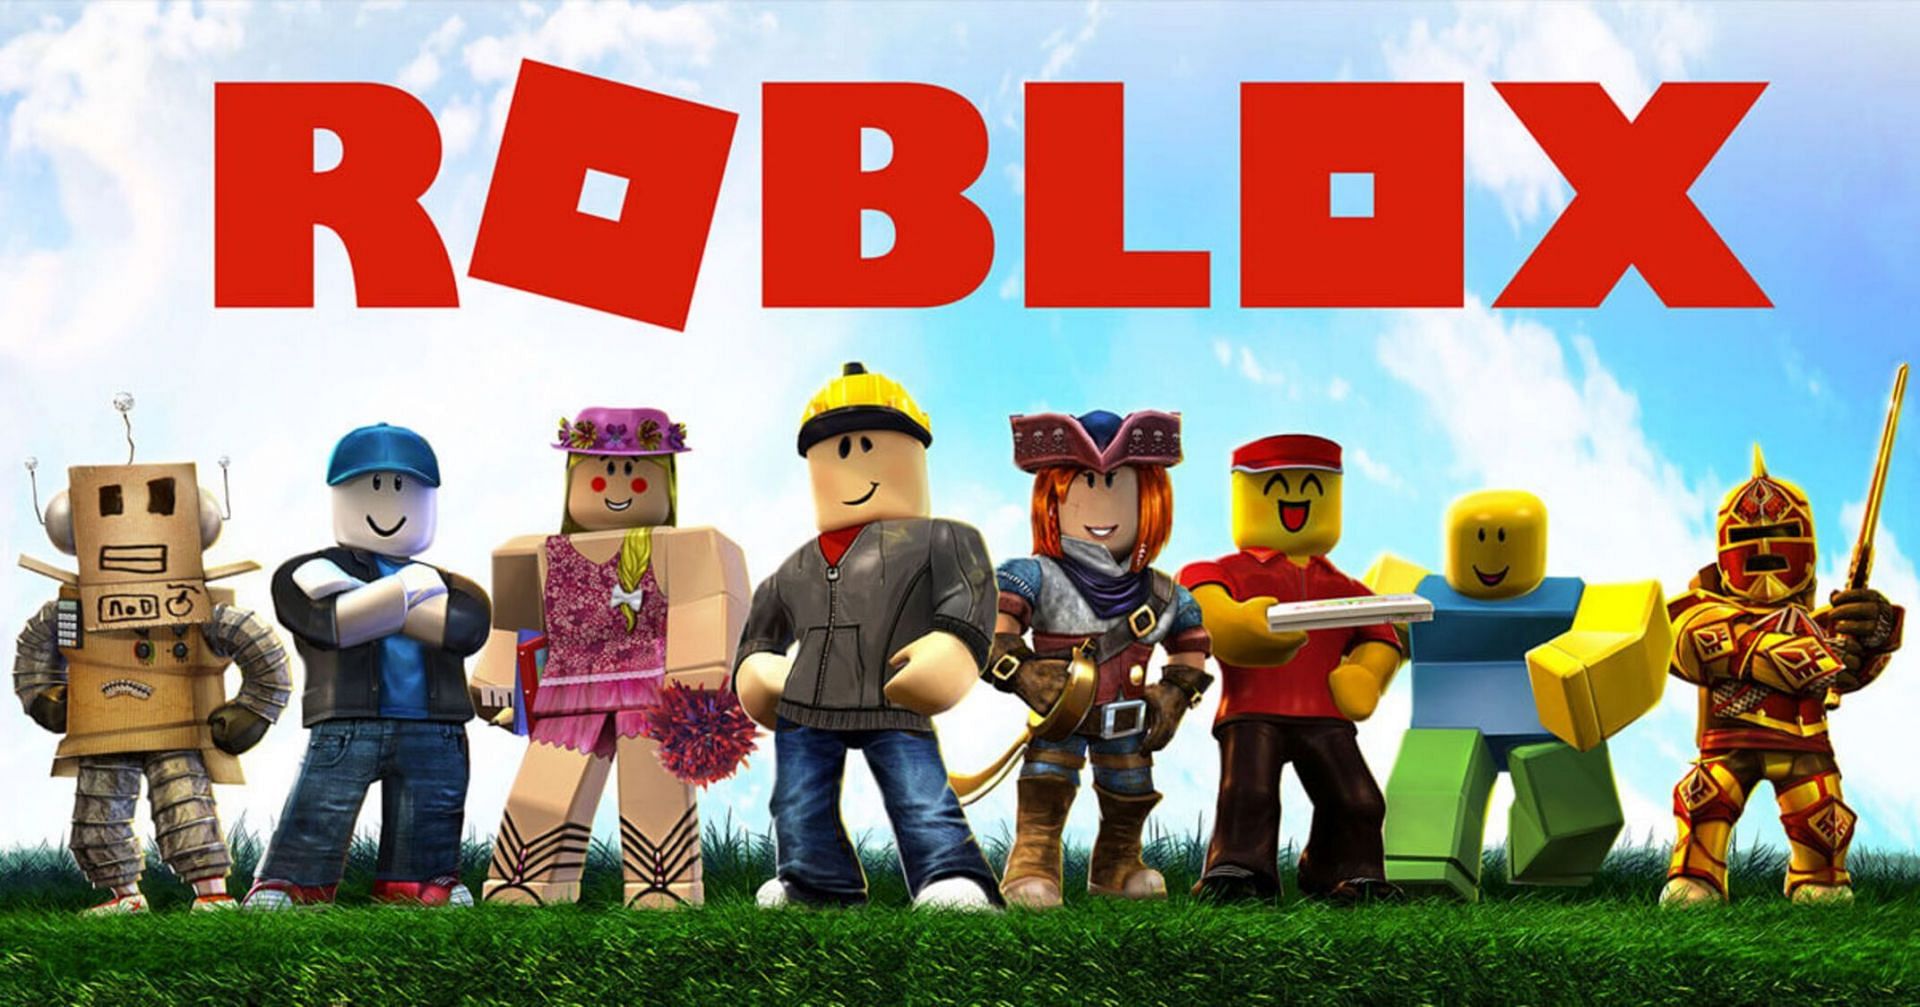 What are the top 3 fan favorite games in Roblox as of November 2022?